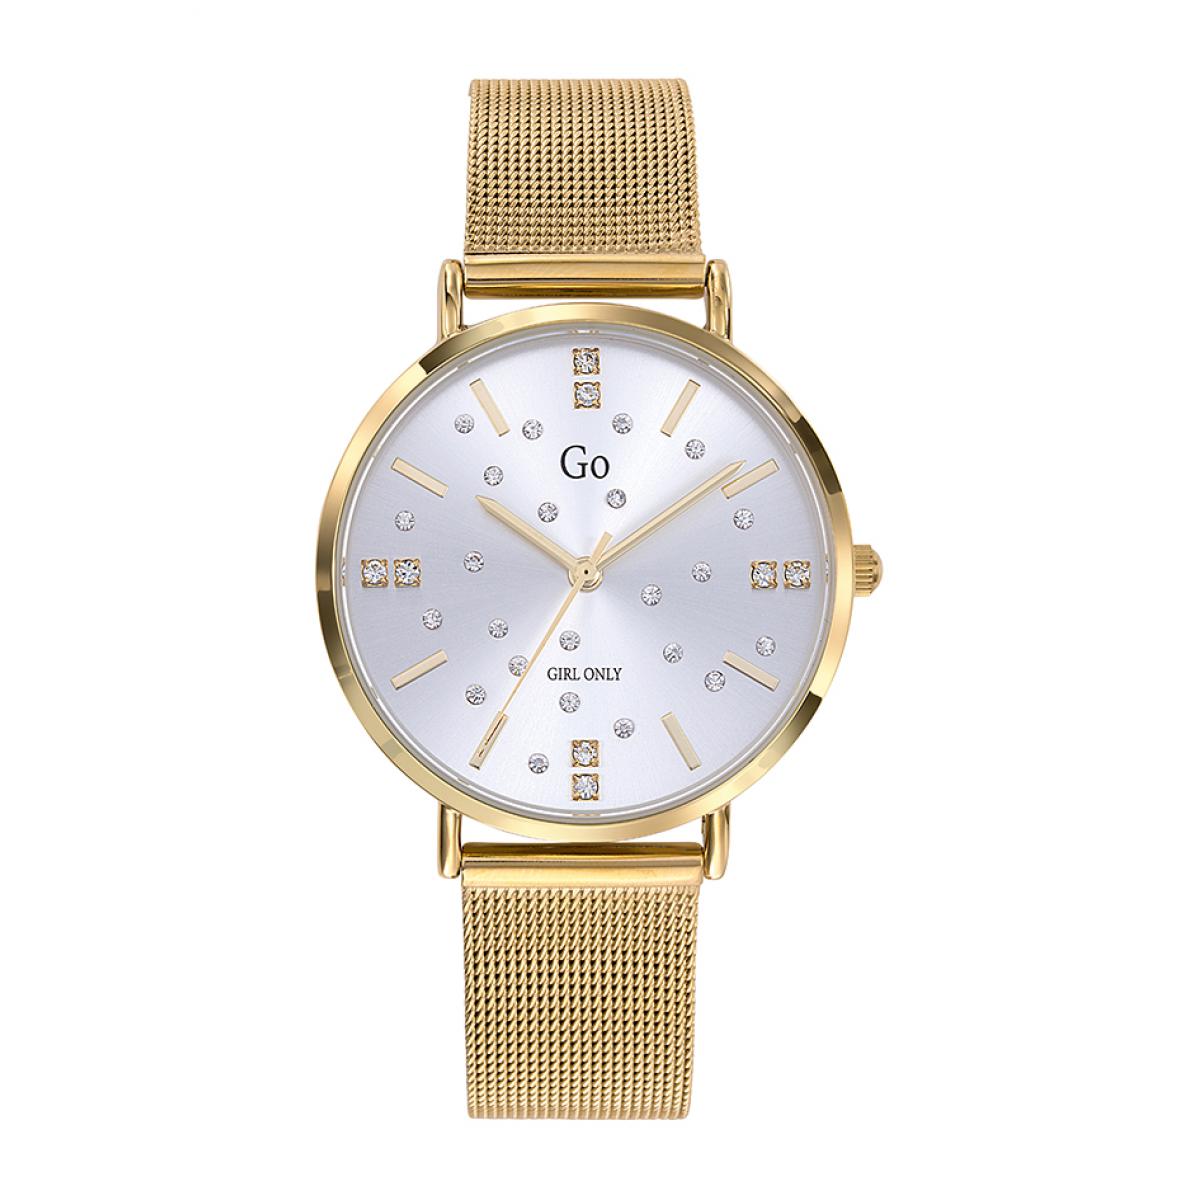 Go Girl Only Montres 695320